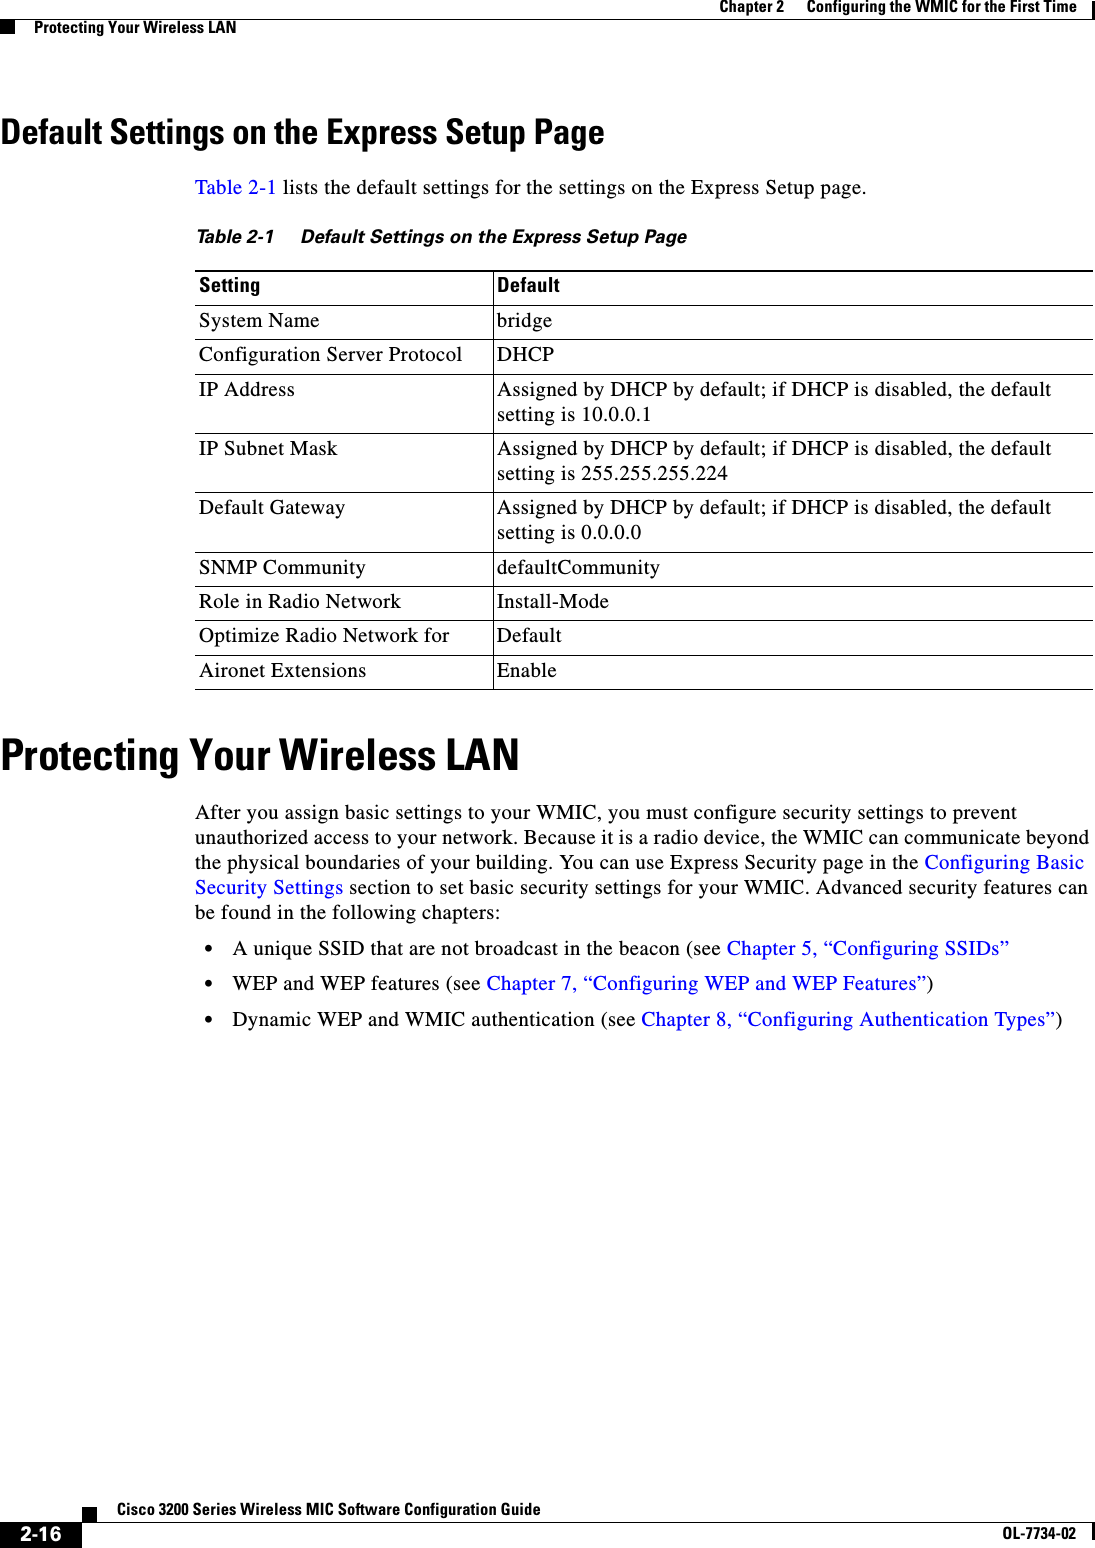 2-16Cisco 3200 Series Wireless MIC Software Configuration GuideOL-7734-02Chapter 2      Configuring the WMIC for the First TimeProtecting Your Wireless LANDefault Settings on the Express Setup PageTable 2-1 lists the default settings for the settings on the Express Setup page. Protecting Your Wireless LANAfter you assign basic settings to your WMIC, you must configure security settings to prevent unauthorized access to your network. Because it is a radio device, the WMIC can communicate beyond the physical boundaries of your building. You can use Express Security page in the Configuring Basic Security Settings section to set basic security settings for your WMIC. Advanced security features can be found in the following chapters:•A unique SSID that are not broadcast in the beacon (see Chapter 5, “Configuring SSIDs”•WEP and WEP features (see Chapter 7, “Configuring WEP and WEP Features”)•Dynamic WEP and WMIC authentication (see Chapter 8, “Configuring Authentication Types”)Table 2-1 Default Settings on the Express Setup PageSetting DefaultSystem Name bridgeConfiguration Server Protocol DHCPIP Address Assigned by DHCP by default; if DHCP is disabled, the default setting is 10.0.0.1IP Subnet Mask Assigned by DHCP by default; if DHCP is disabled, the default setting is 255.255.255.224Default Gateway Assigned by DHCP by default; if DHCP is disabled, the default setting is 0.0.0.0SNMP Community defaultCommunityRole in Radio Network Install-ModeOptimize Radio Network for DefaultAironet Extensions Enable